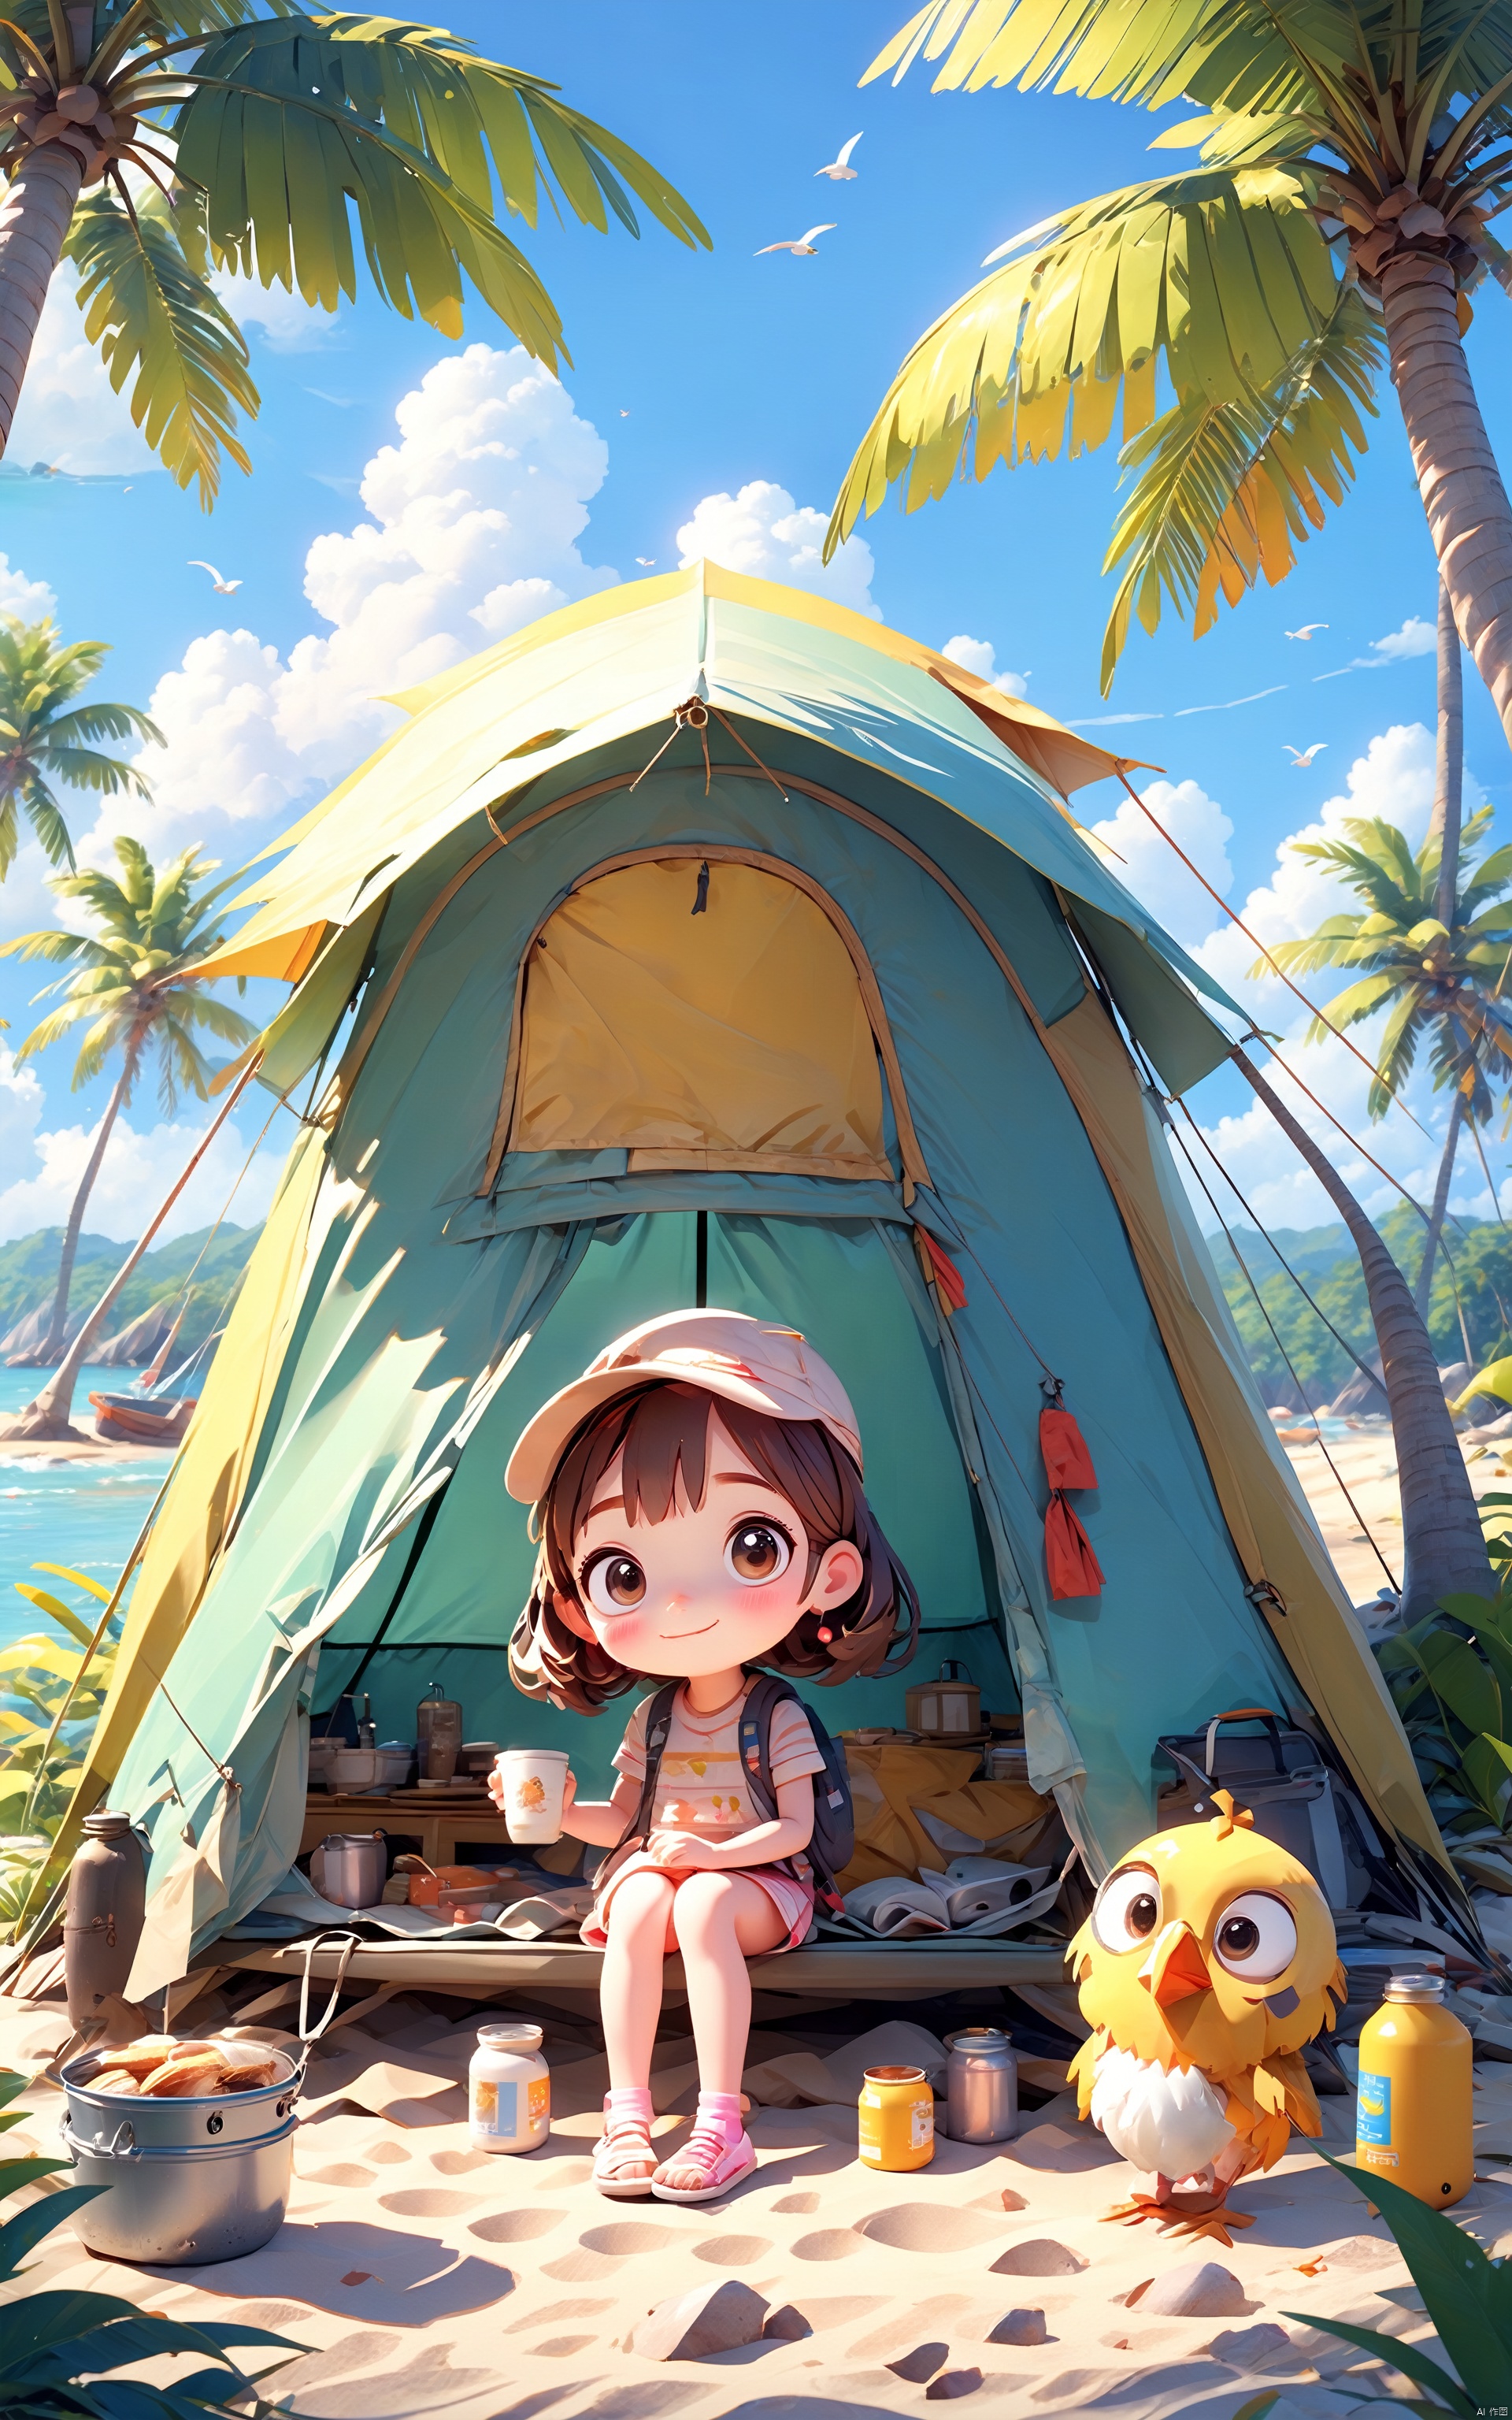  In spring, a super cute little girl is camping by the seaside. There are cars, tents, chairs, Chicken rolls tables, barbecues, coconut trees, coconuts, beaches, oceans, treatment systems, big eyes and happy smiles. Wonderful clean and bright background, super cute girl, popular blind box clay style, bright background, 3D art, Pixar trend, octane rendering, ray tracing, complex details, animated lighting, vibrant colors, best quality, c4d

